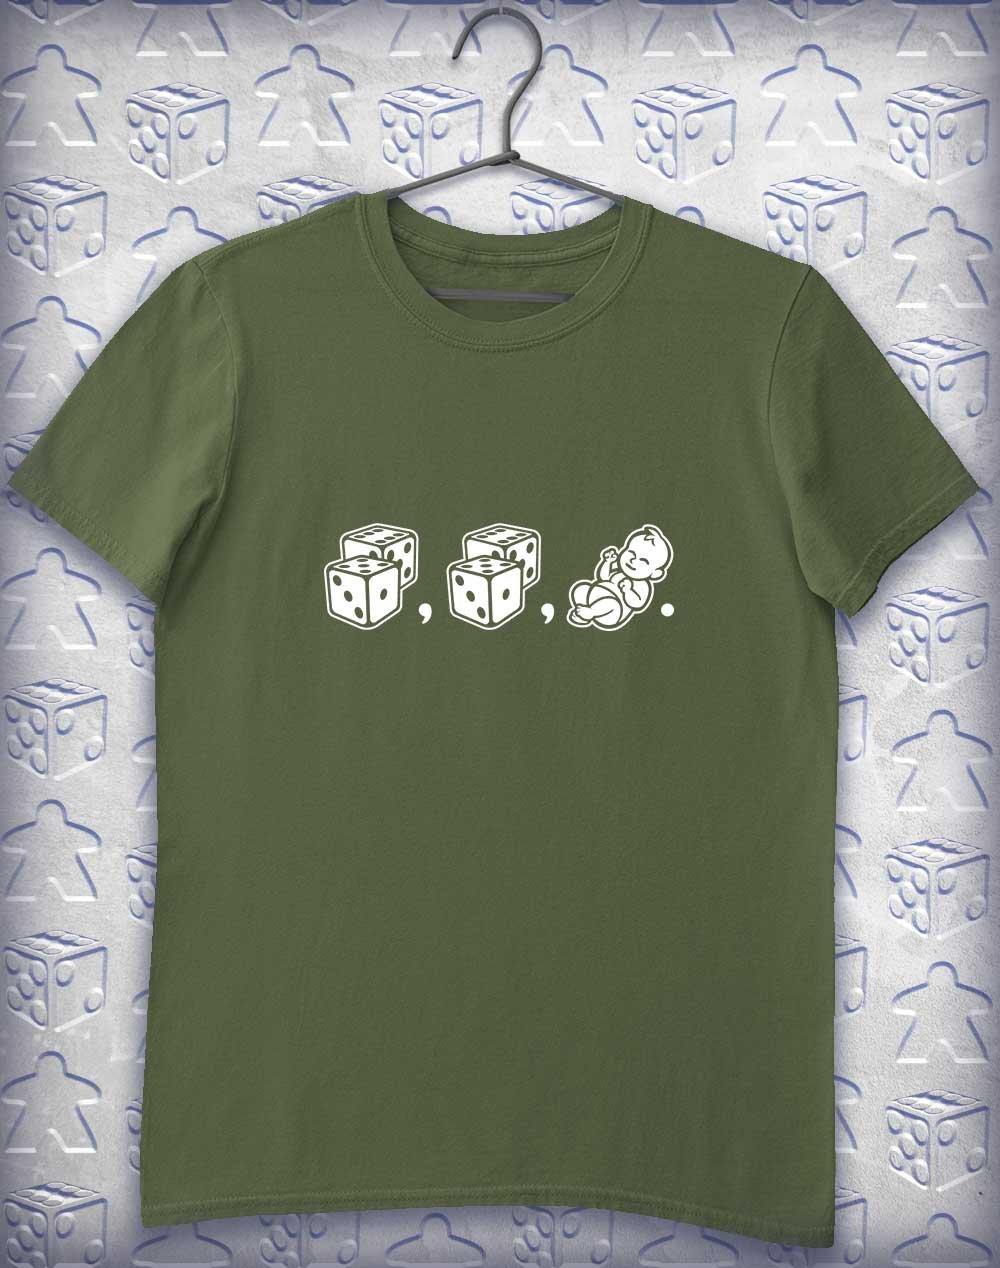 Dice Dice Baby (Plural) Alphagamer T-Shirt S / Military Green  - Off World Tees